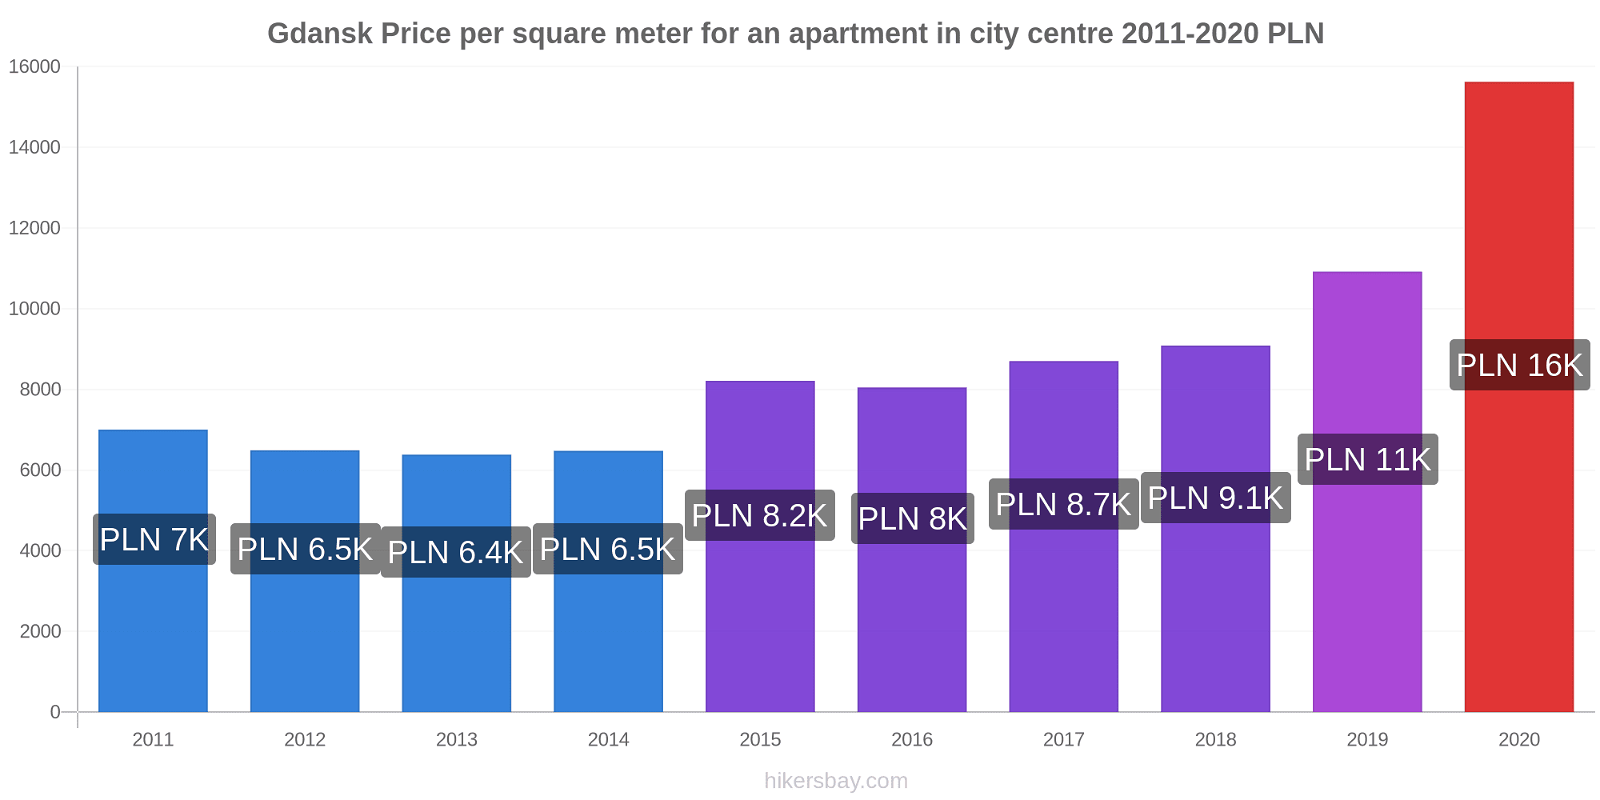 Gdansk price changes Price per square meter for an apartment in city centre hikersbay.com